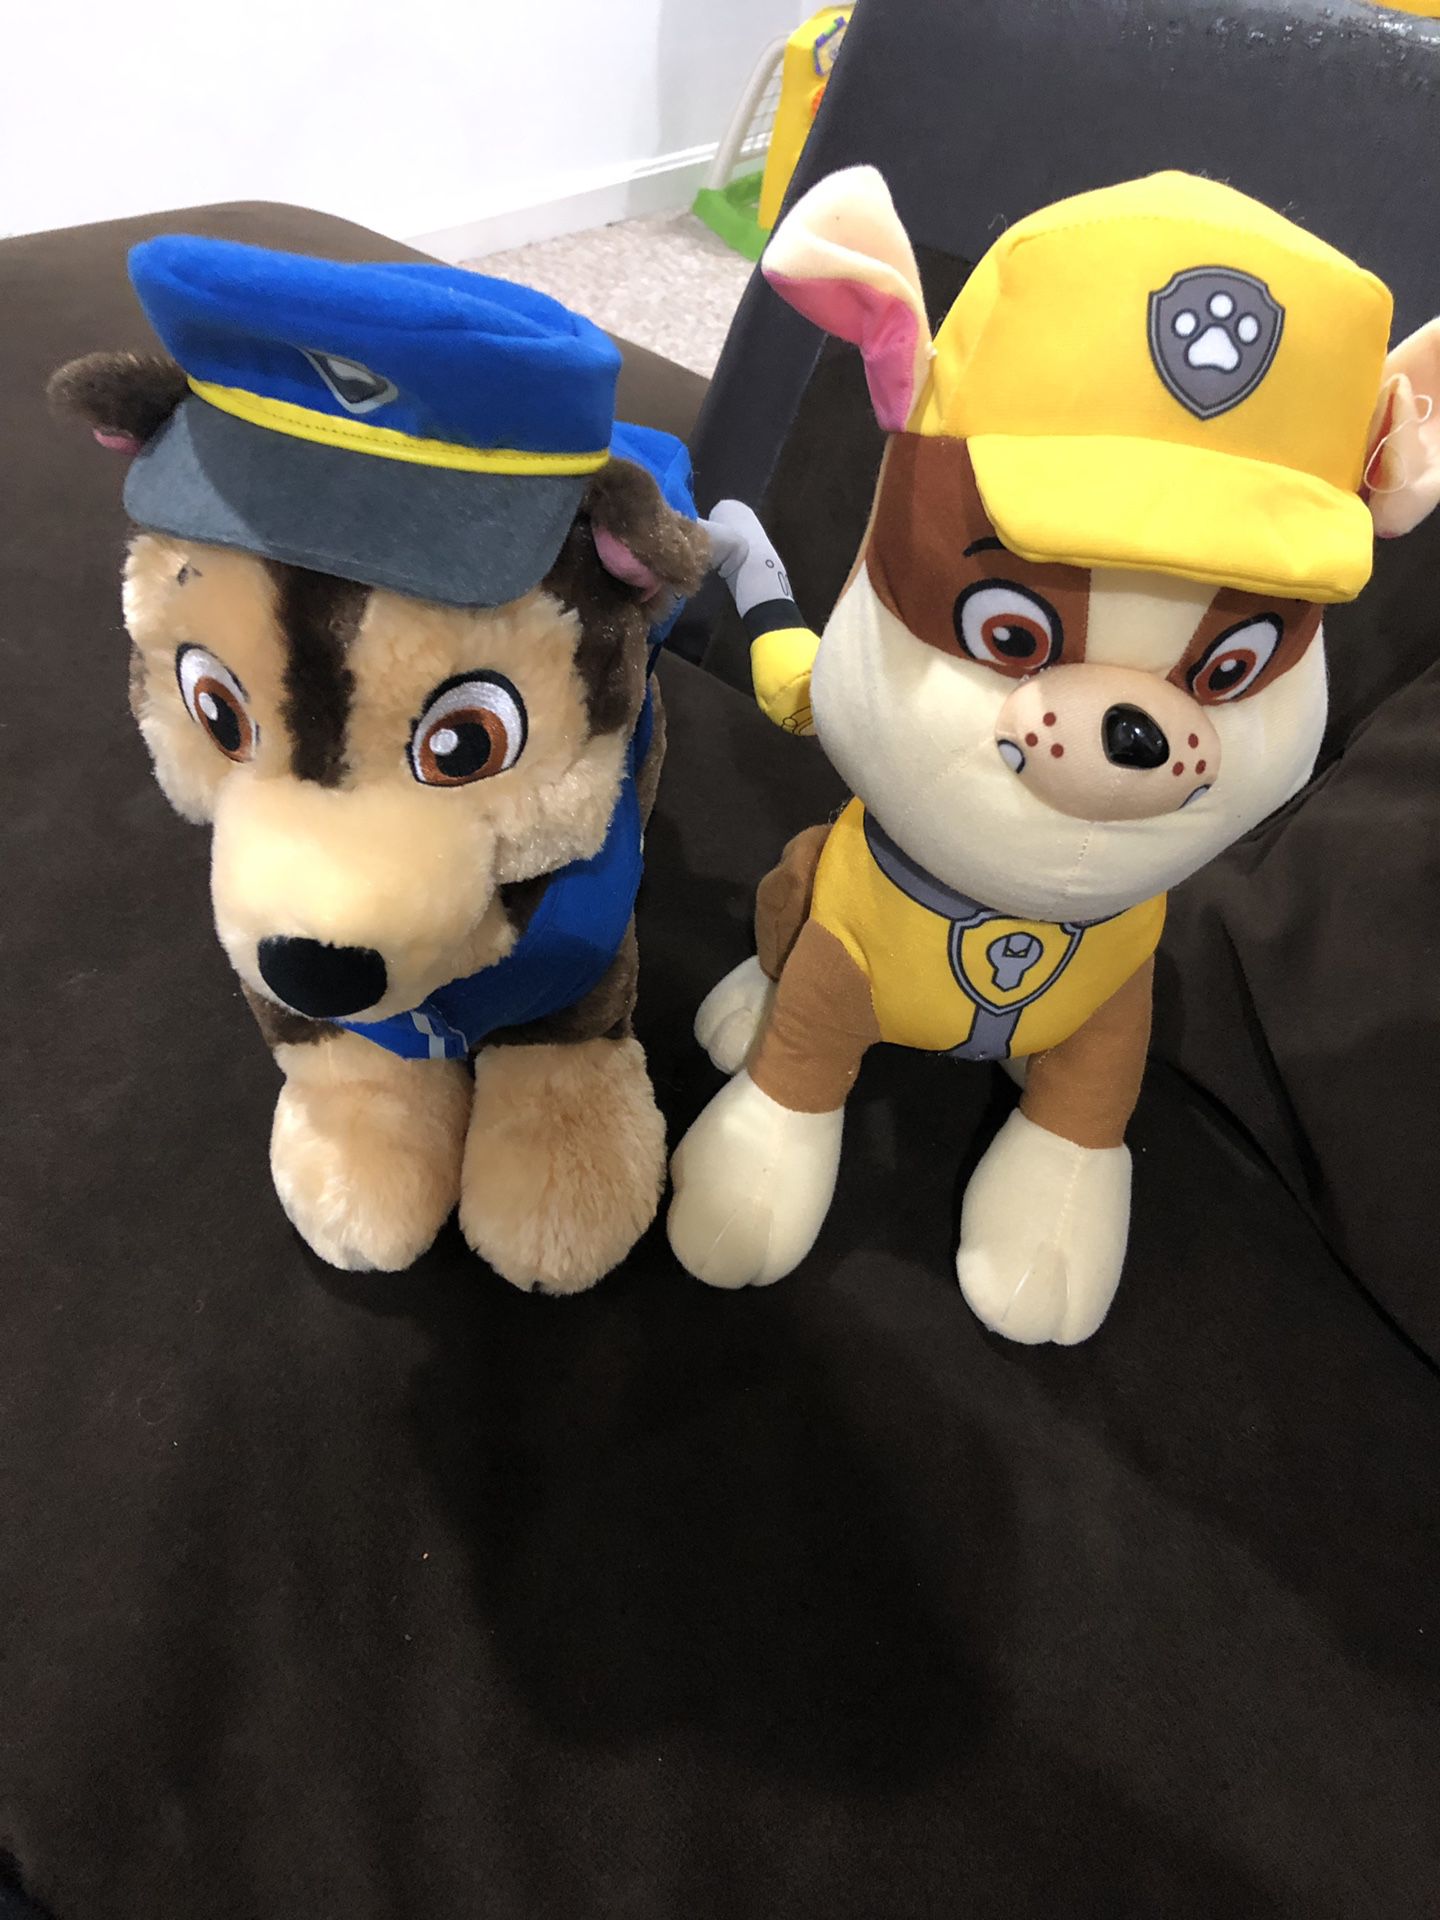 PAW PATROL-Build-A-Bear Chase and Plush Rubble